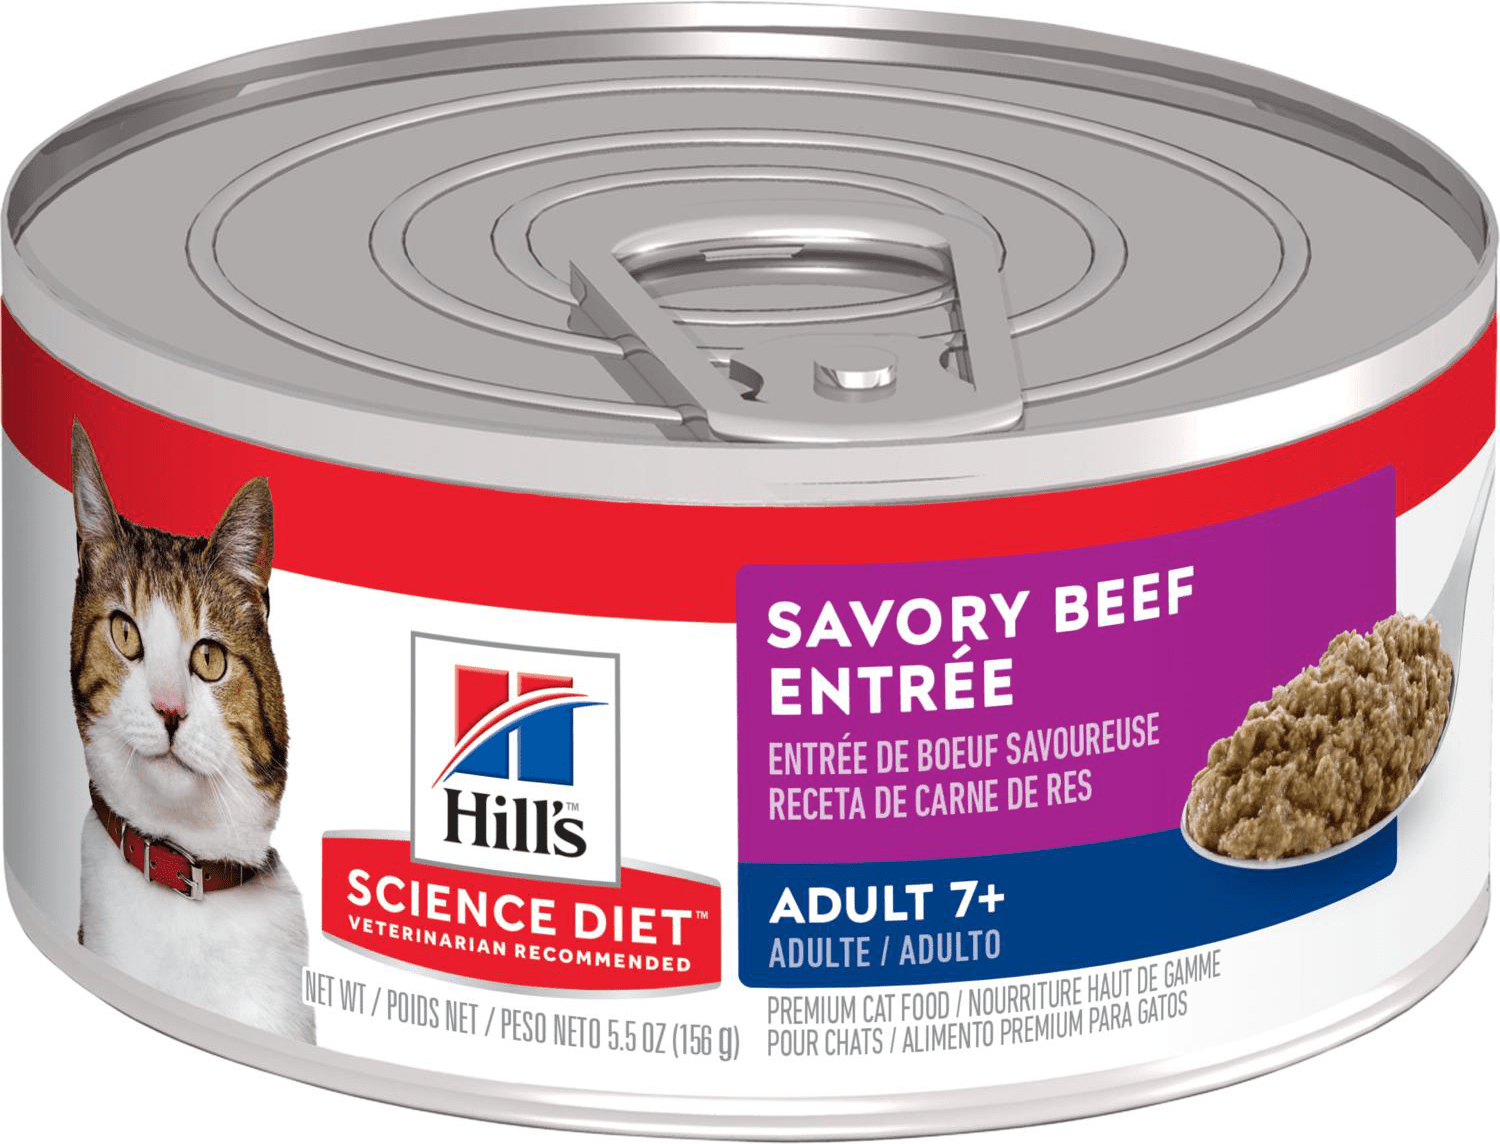 Hill's Science Diet Adult 7+ Savory Beef Entrée